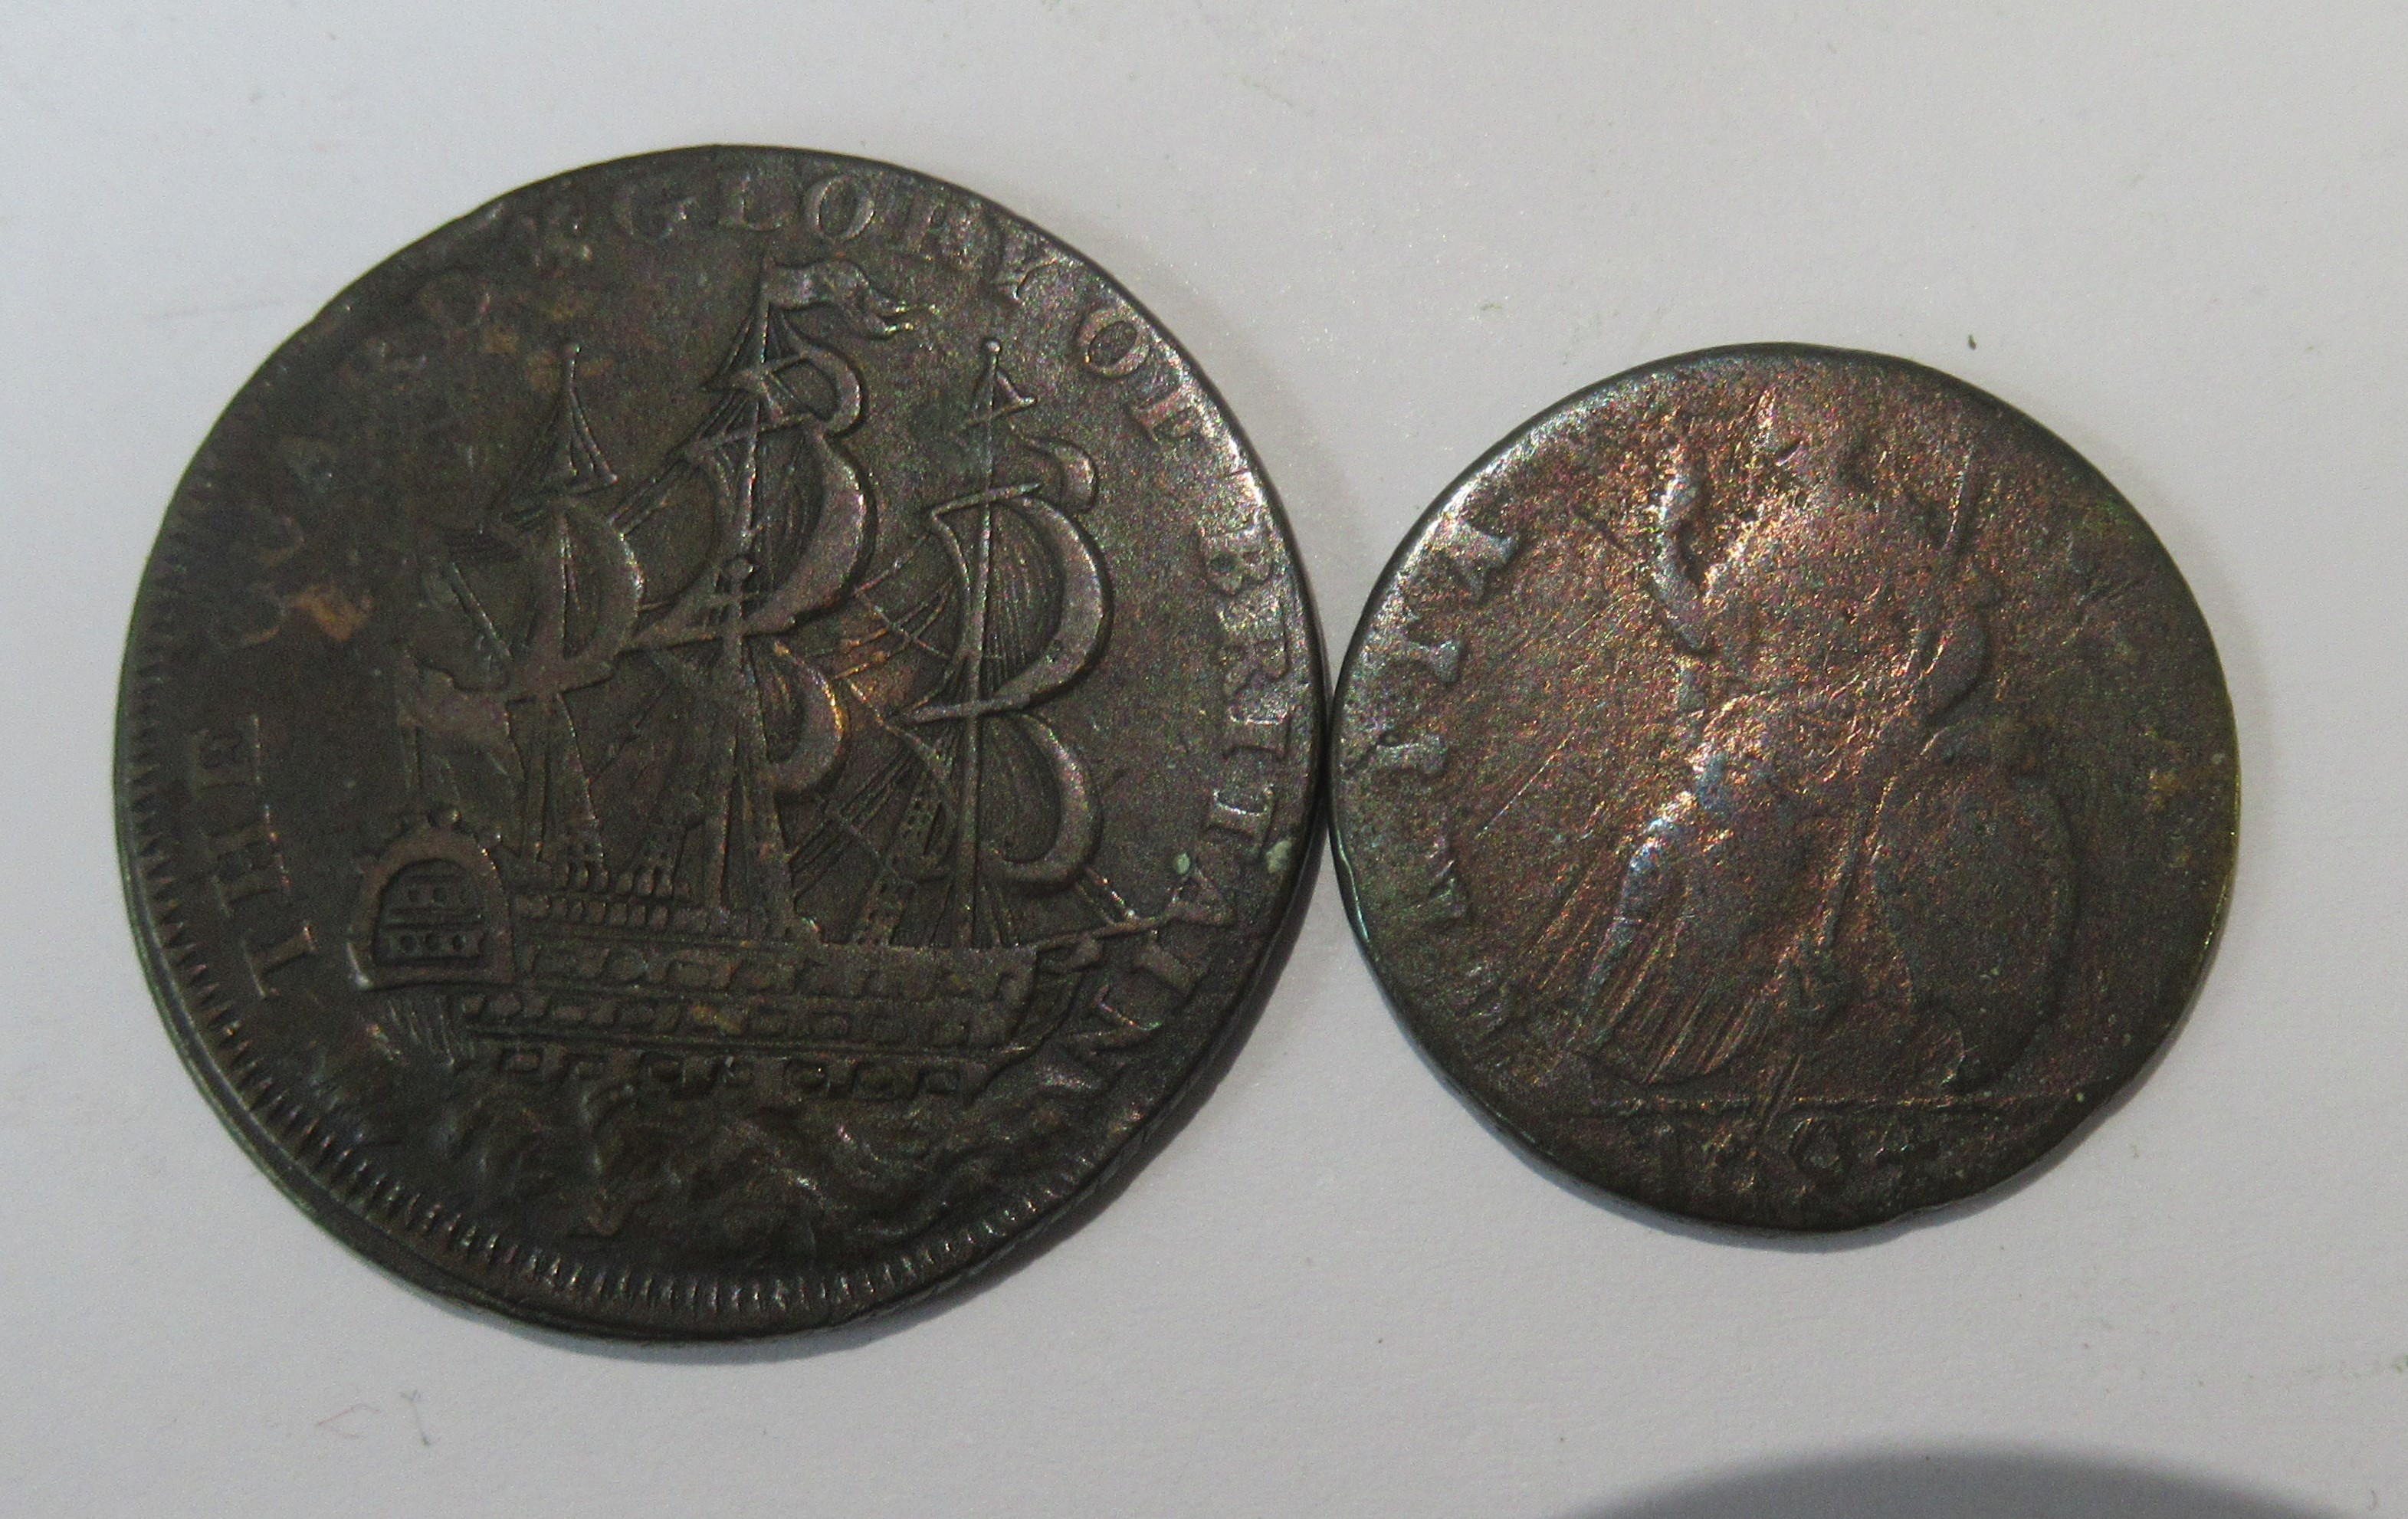 A conder token, circa 1790, The Guard & Glory of Britain, together with a William and Mary